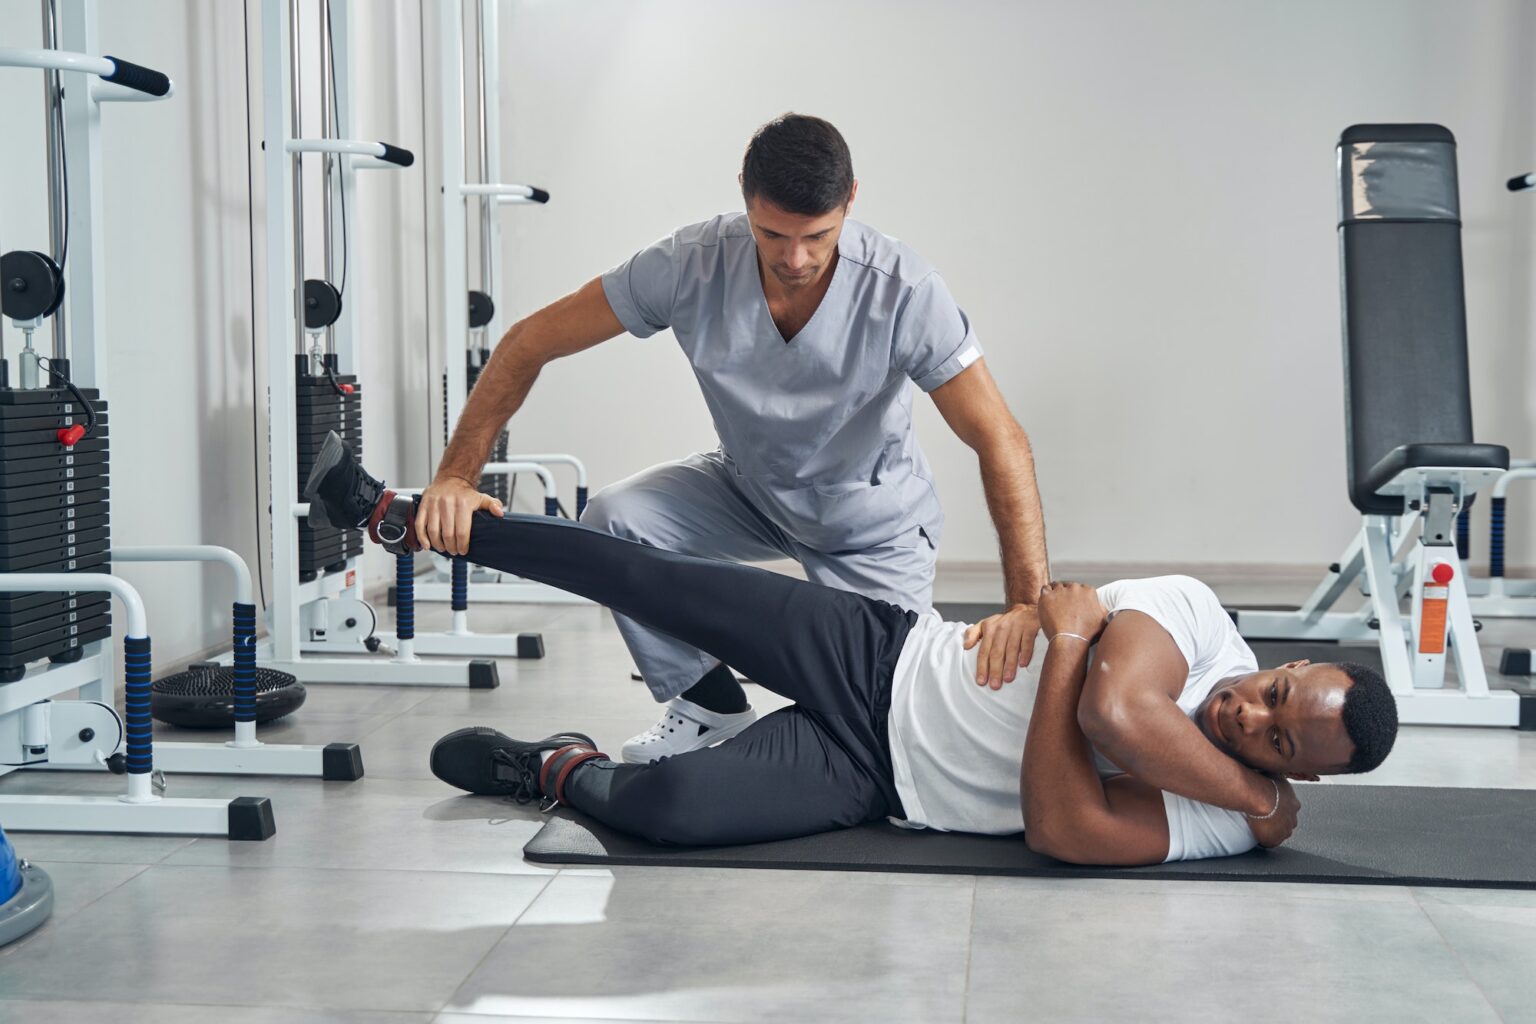 Physiatrist assessing lower body strength of man